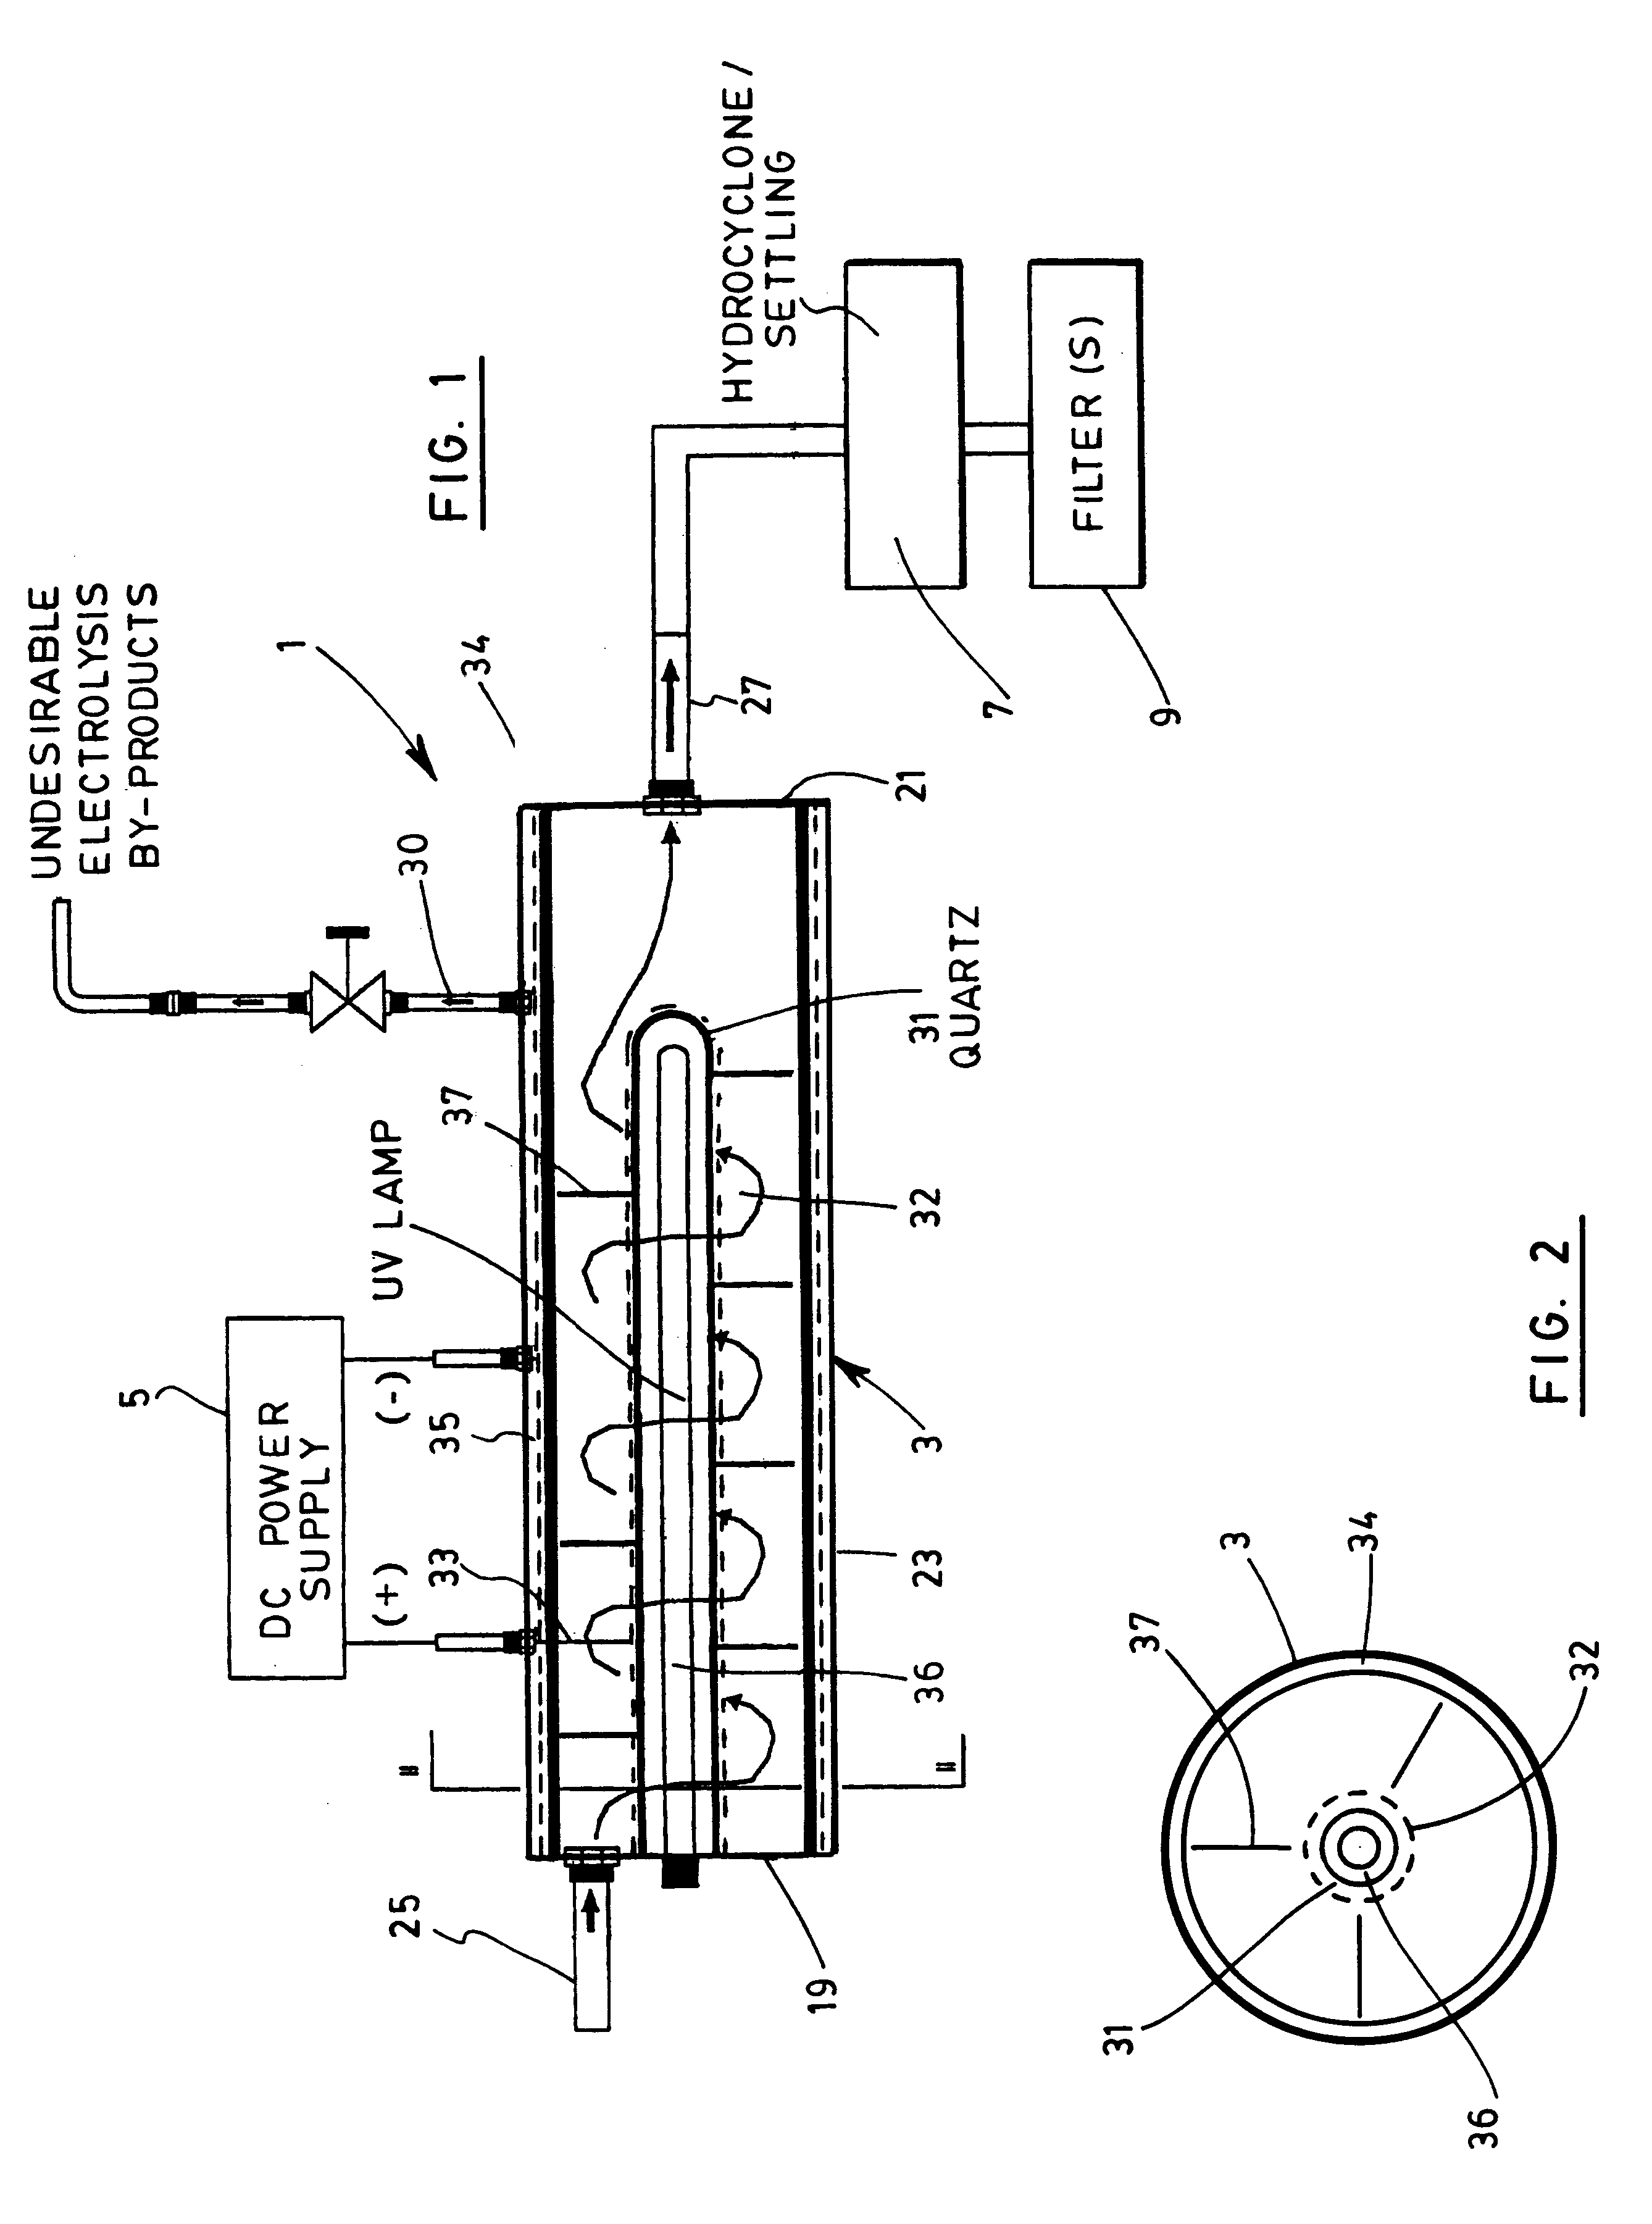 Device and method for treating water with ozone generated by water electrolysis